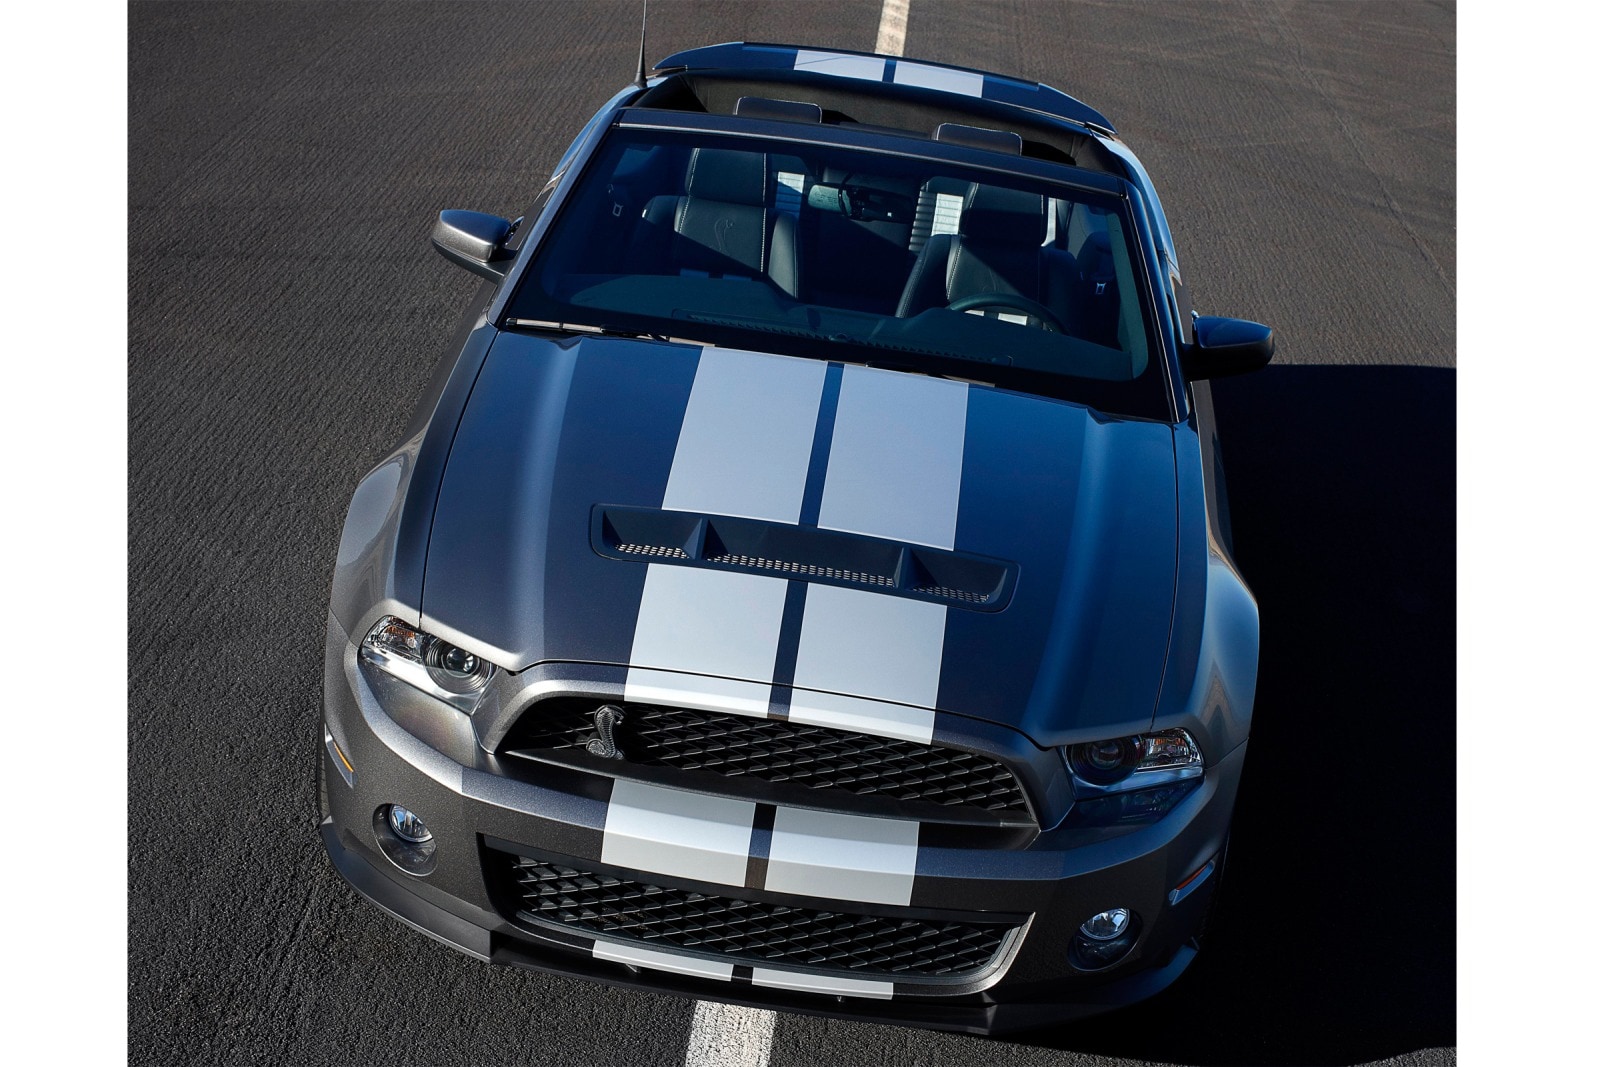 2010 Ford Shelby GT500 Review & Ratings | Edmunds